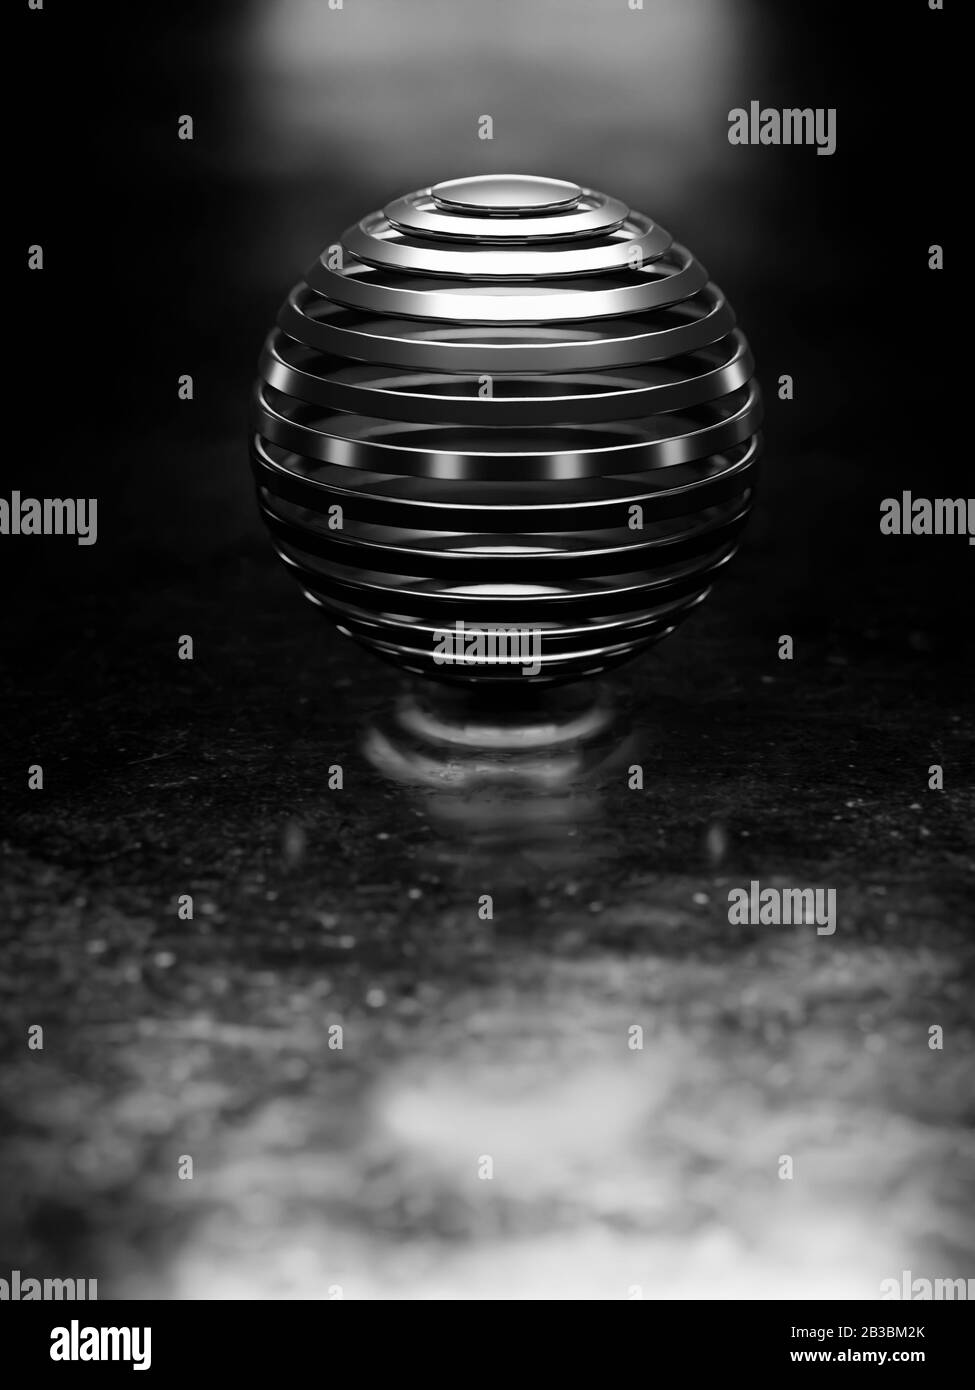 3d abstract metallic ribbed sphere on metallic flat floor with light behind, 3d illustration Stock Photo